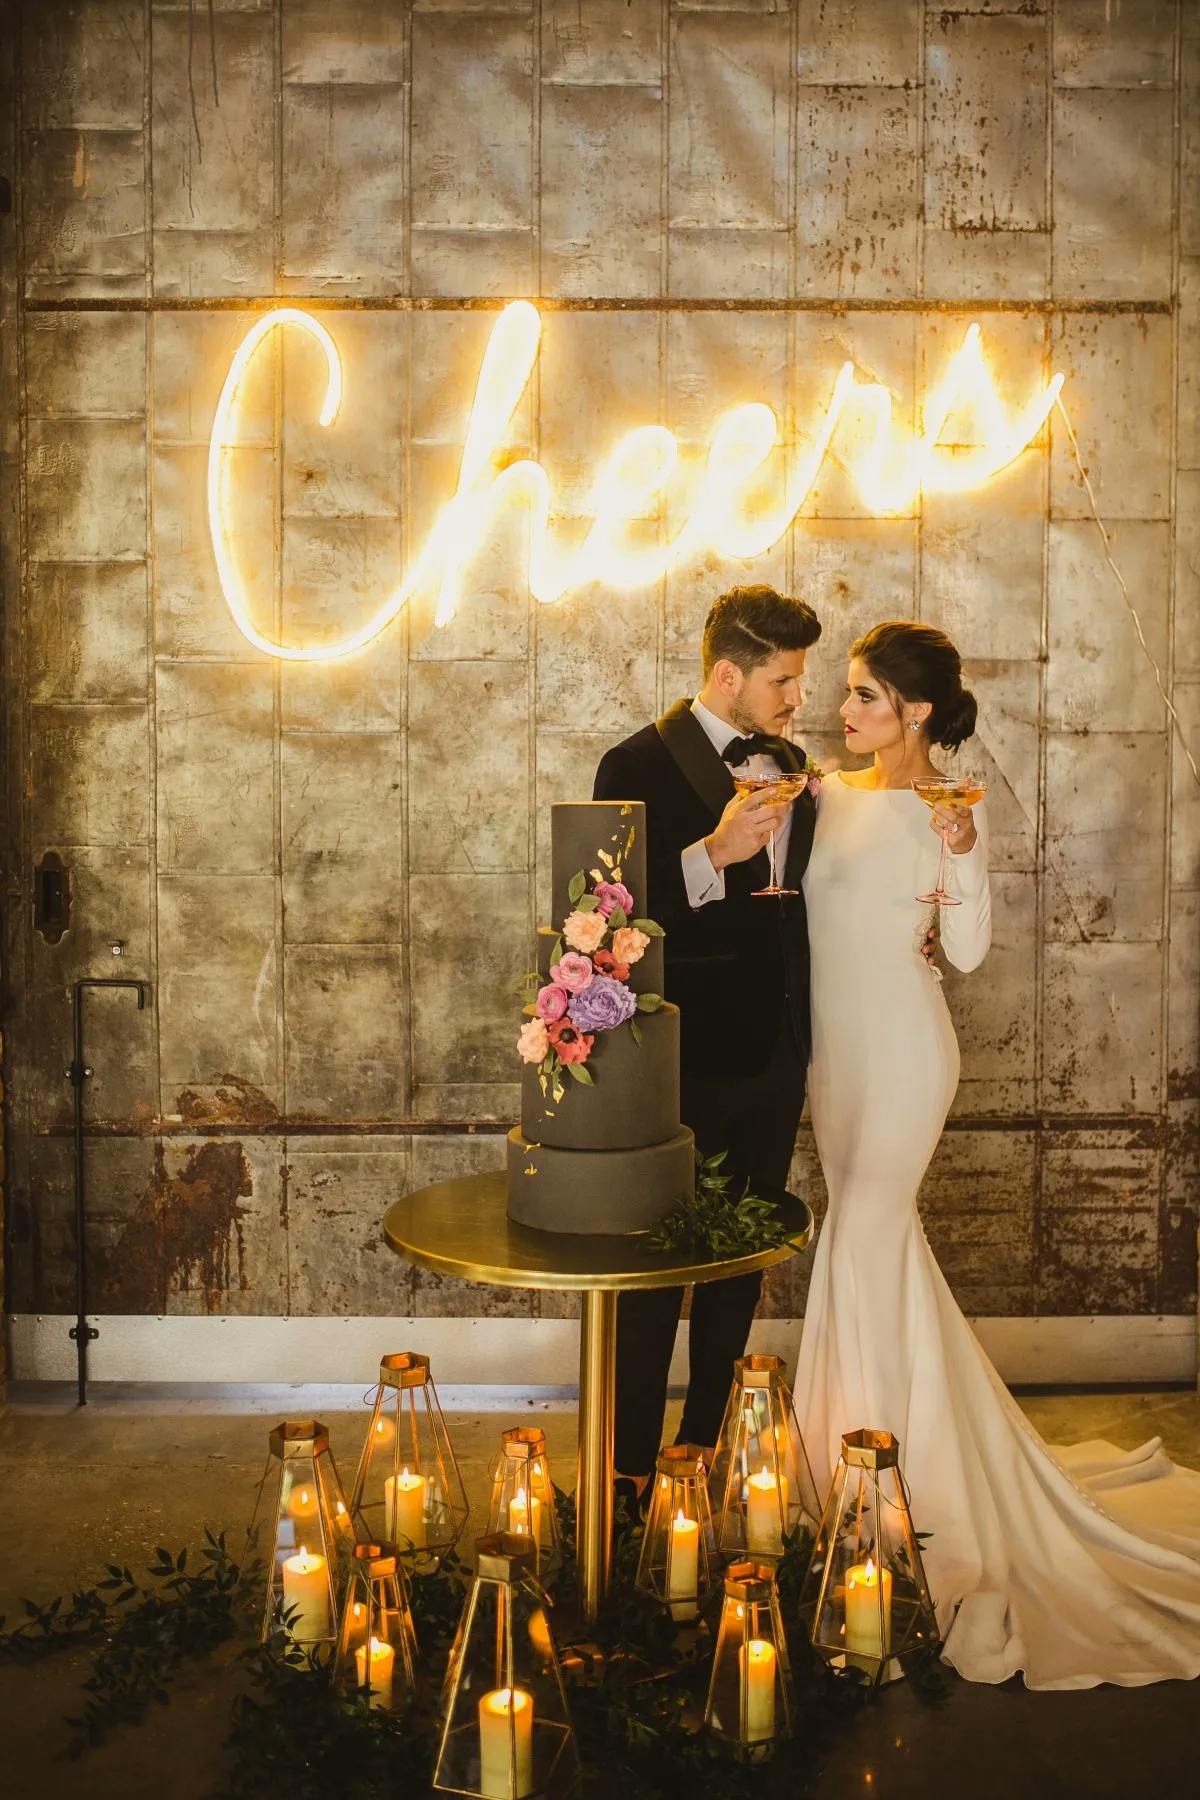 A bride and groom in formal attire stand close together, holding champagne glasses in a warmly lit room. They are in front of a dark wedding cake adorned with flowers, and a bright neon sign that reads "Cheers" is on the wall behind them. Lanterns with candles surround them.